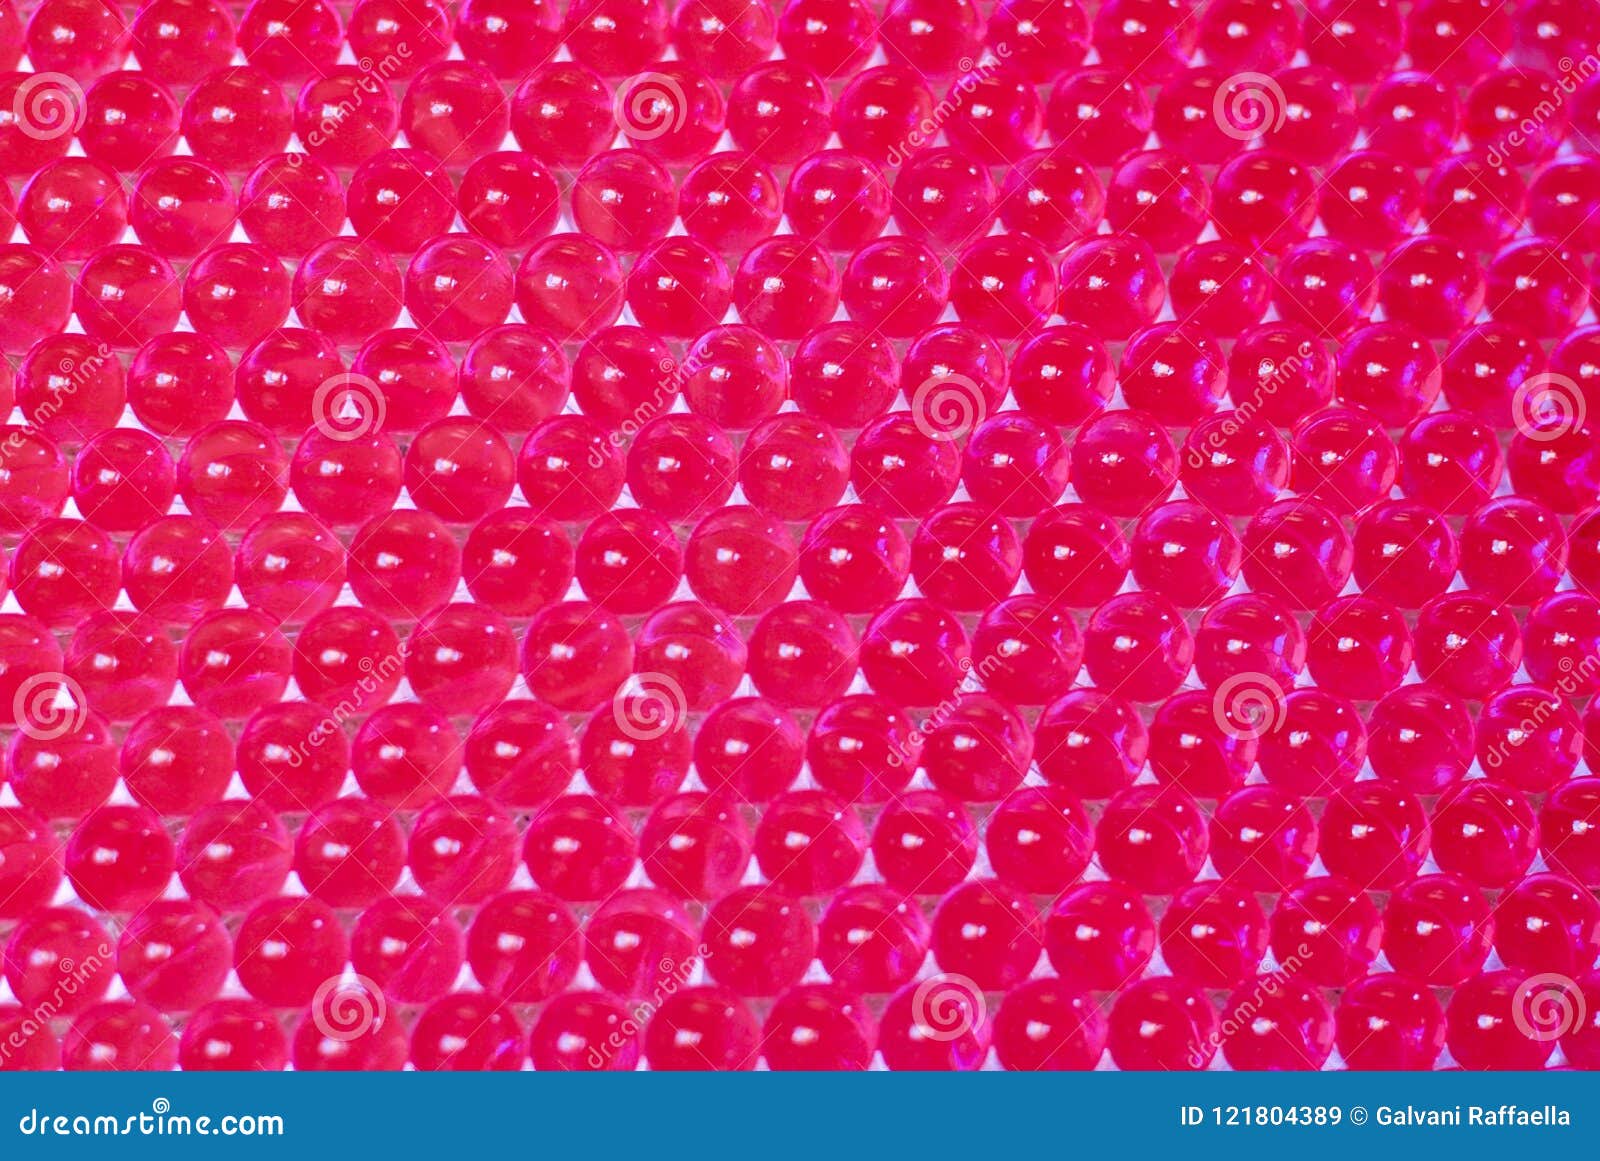 full frame of pink hydrogel rows of balls, abstract background